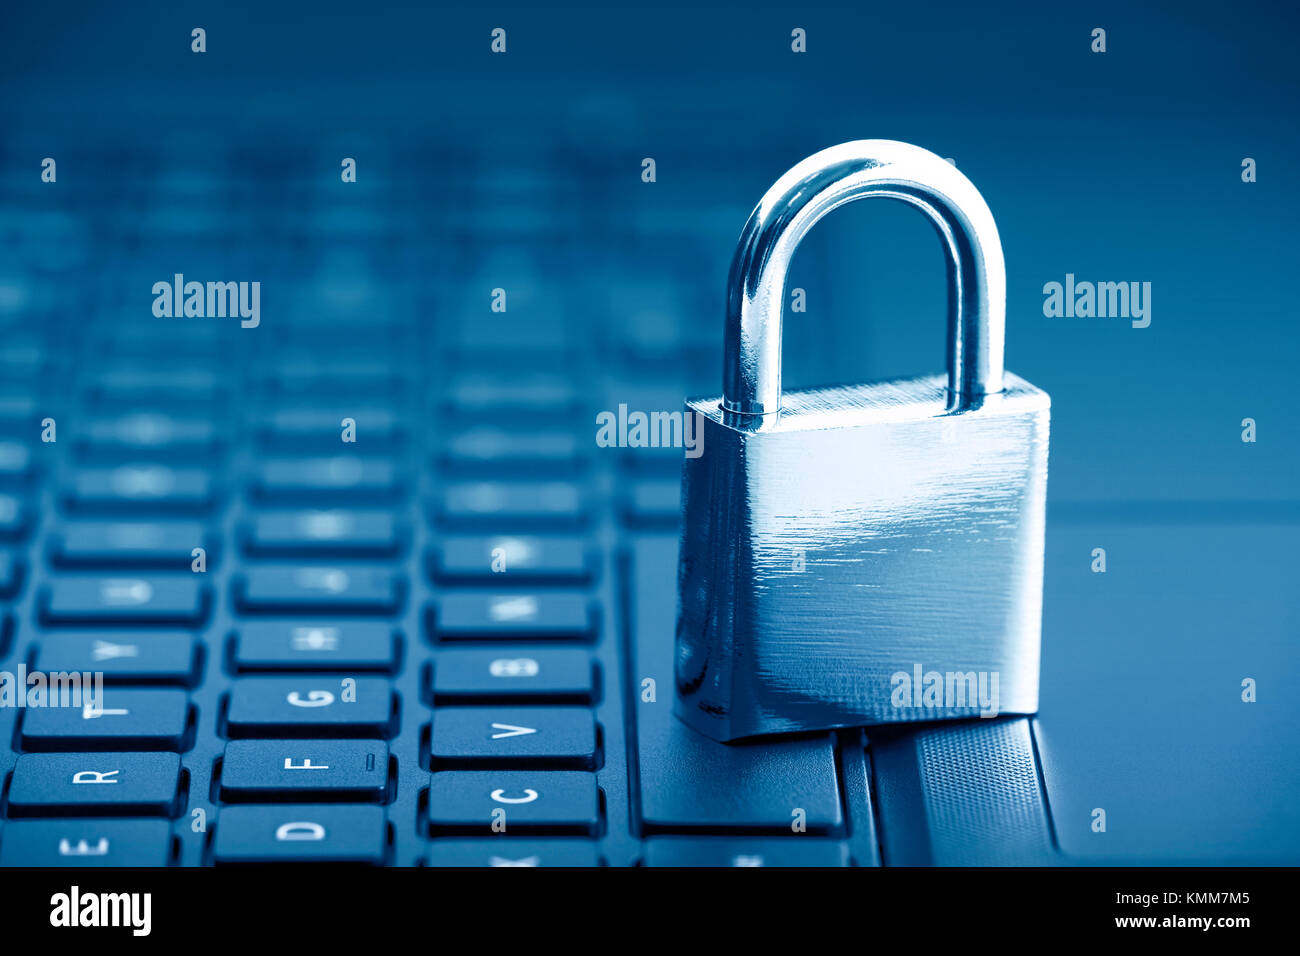 Computer security concept. Padlock on computer keyboard Stock Photo